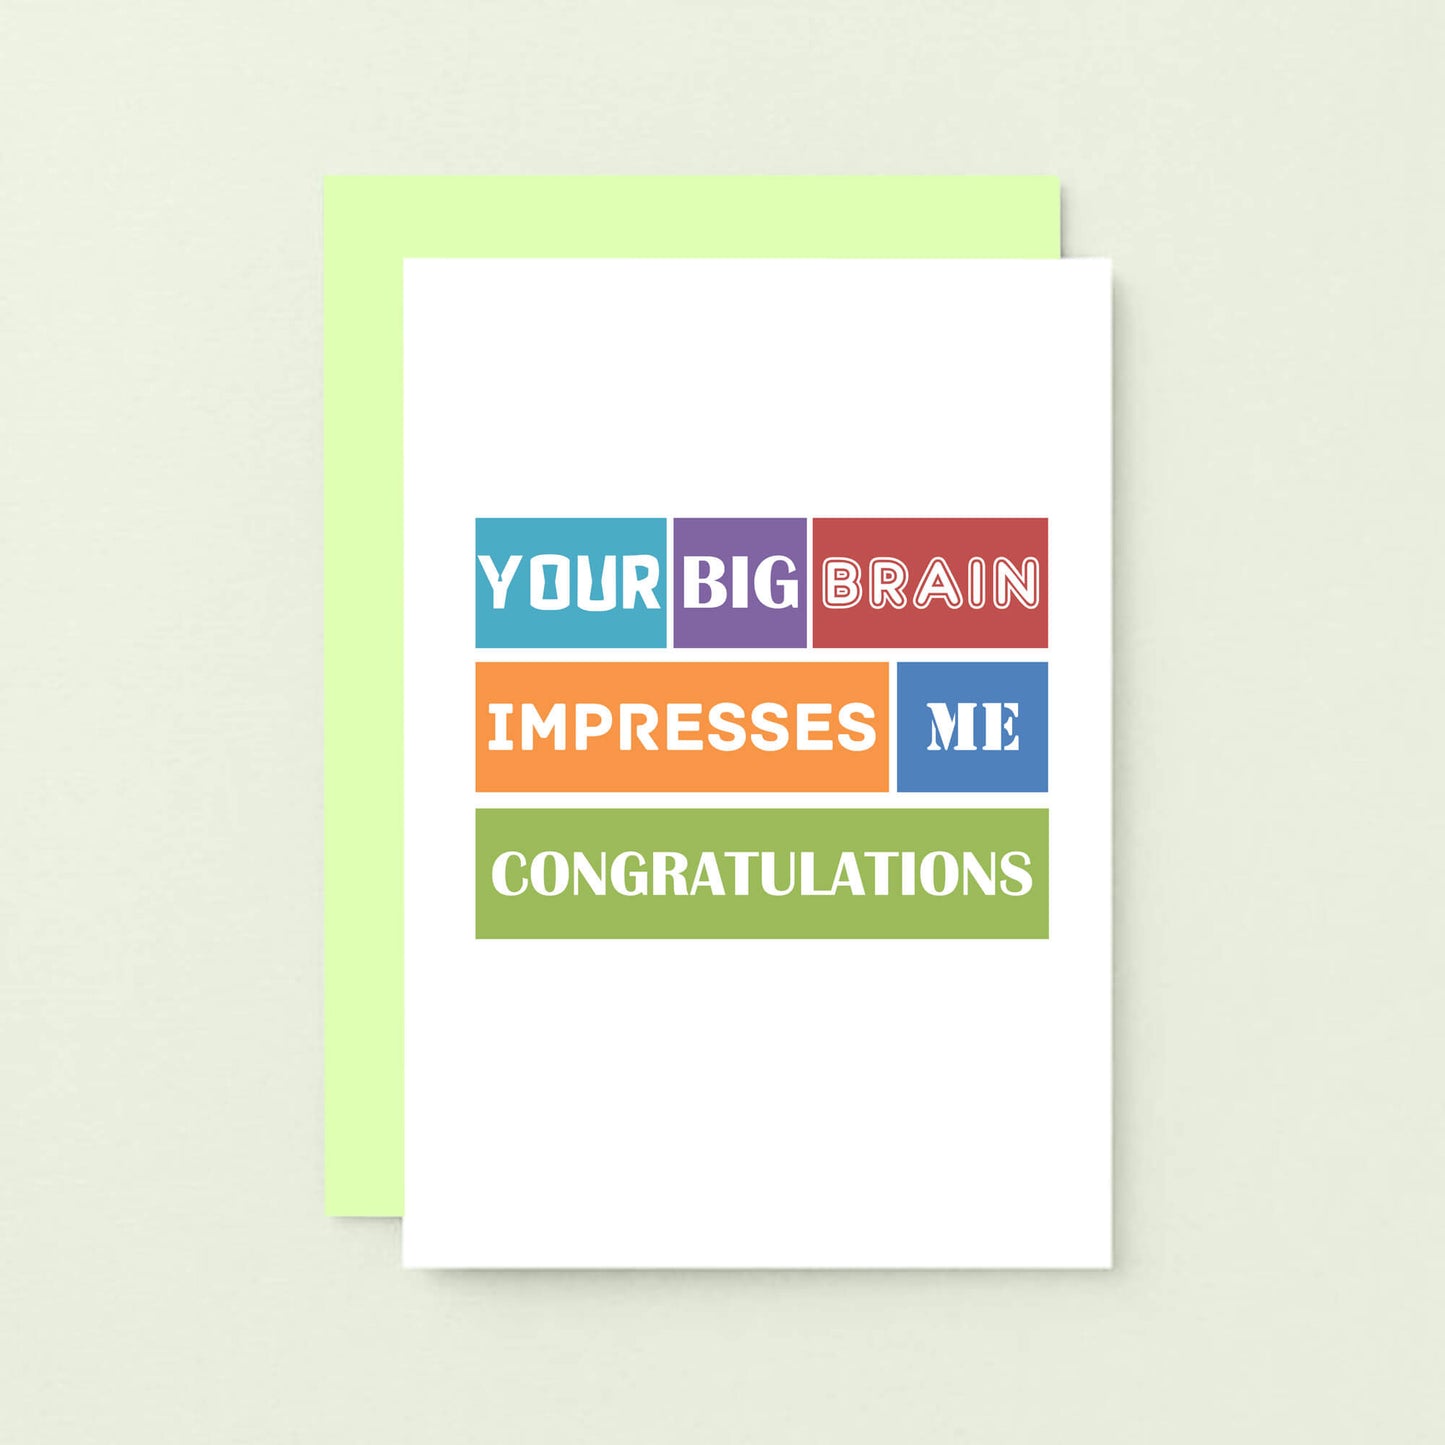 Congratulations Card by SixElevenCreations. Reads Your big brain impresses me. Congratulations. Product Code SE0100A6